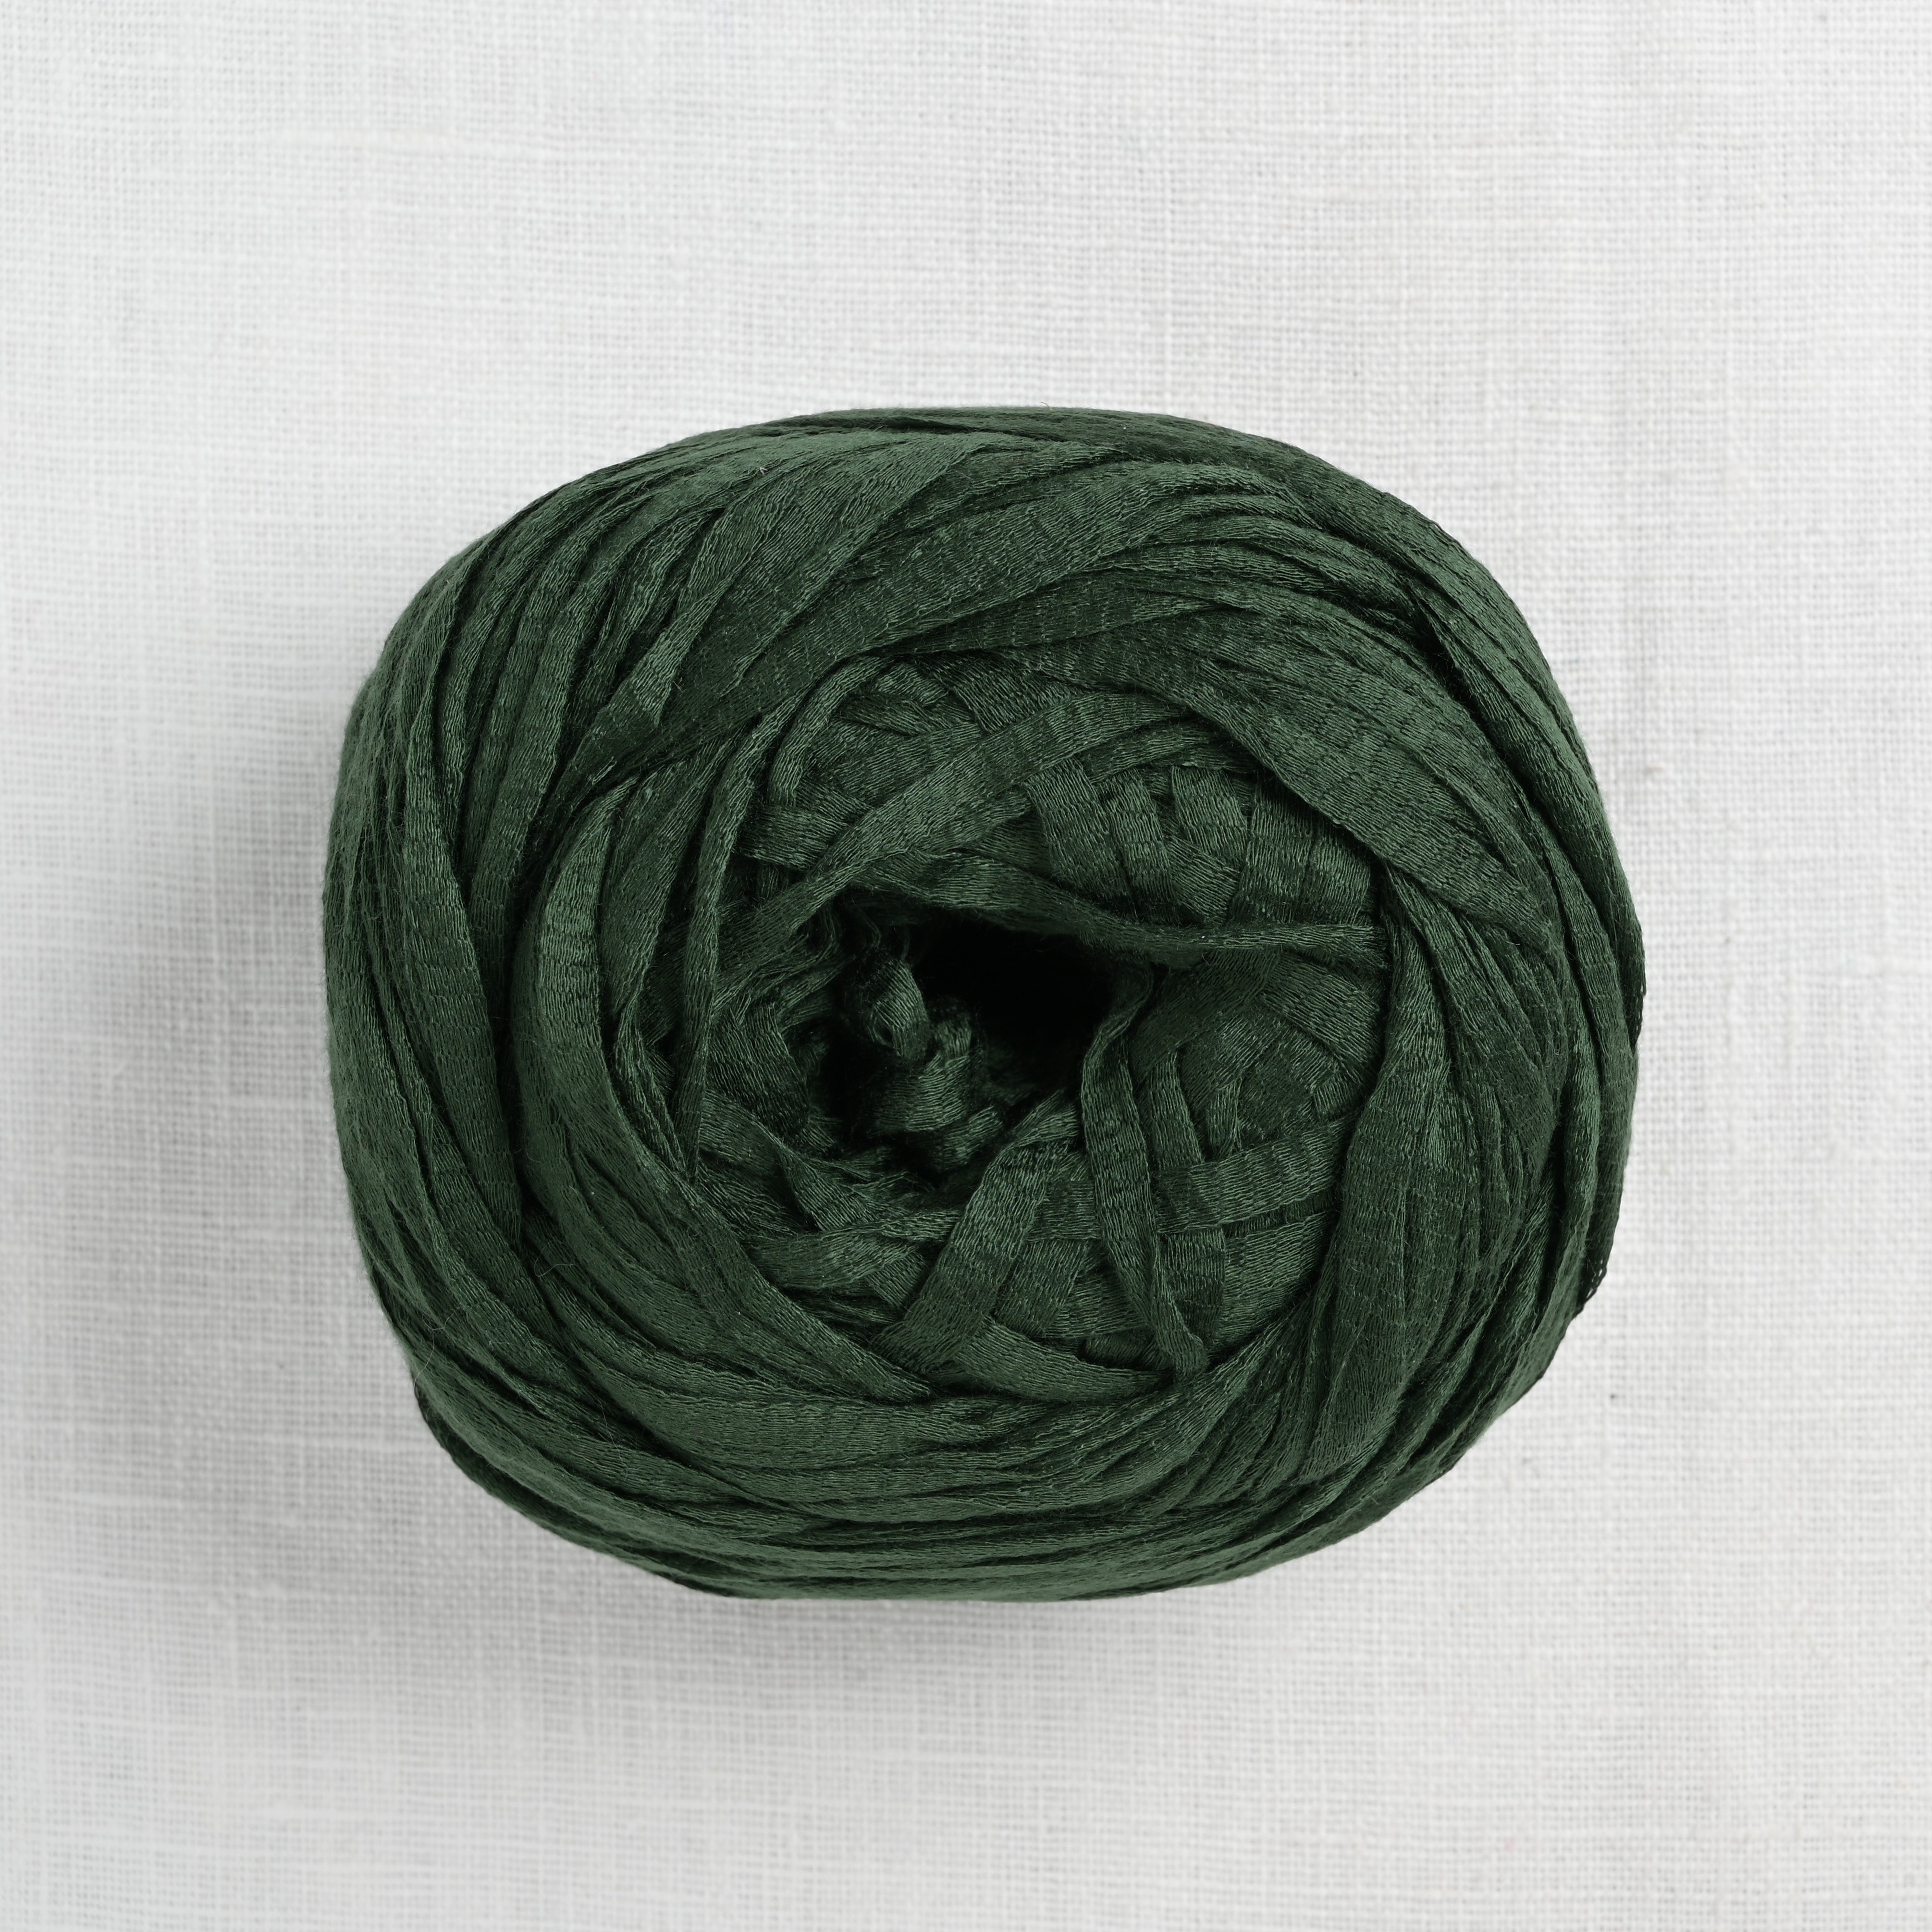 Wool and the Gang Big Love Cotton Olive Green – Wool and Company